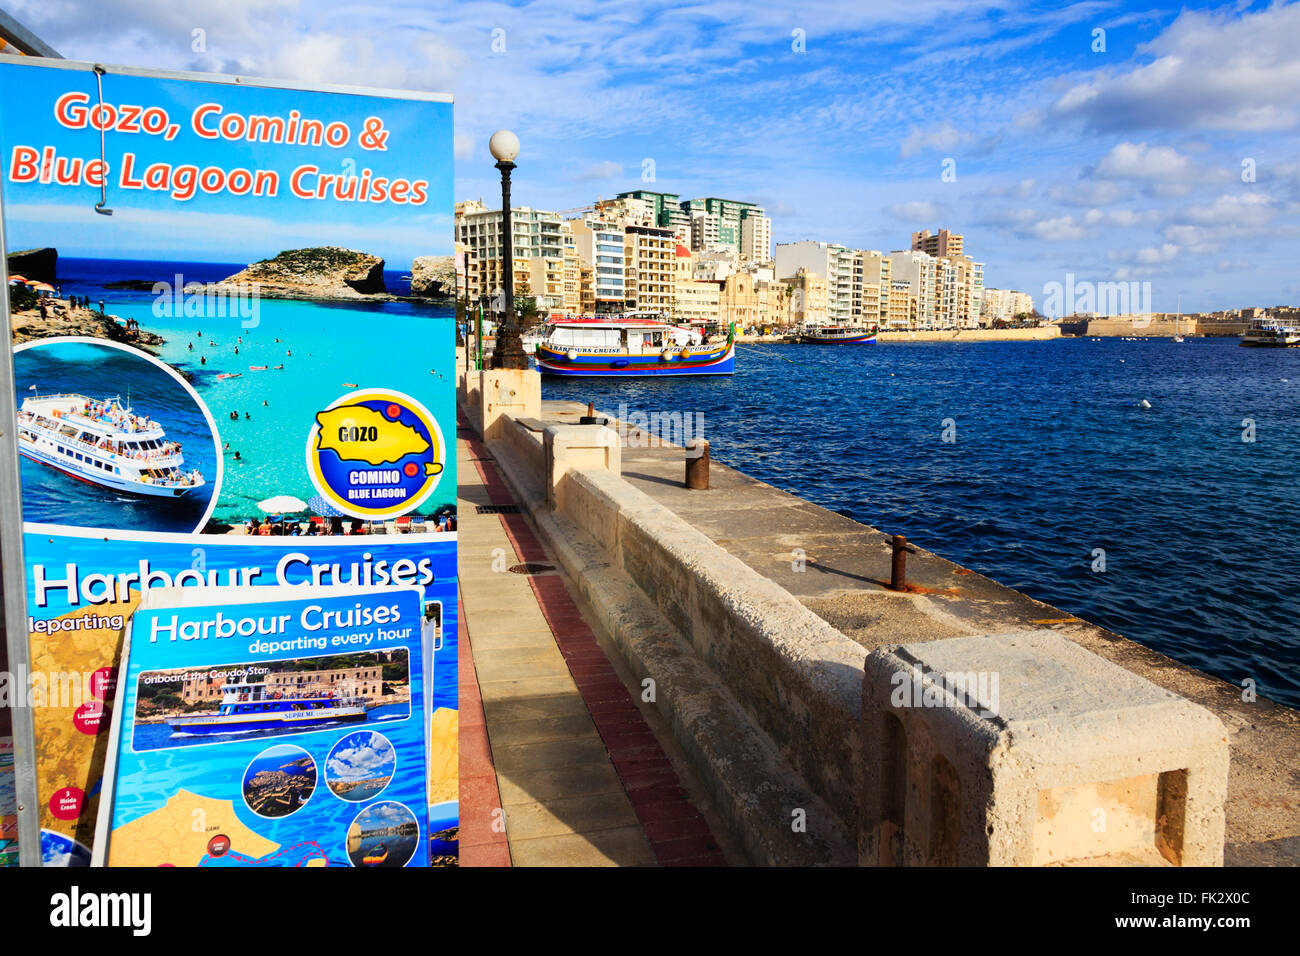 One of many stalls on the Sliema promenade selling day trips on boats. Stock Photo